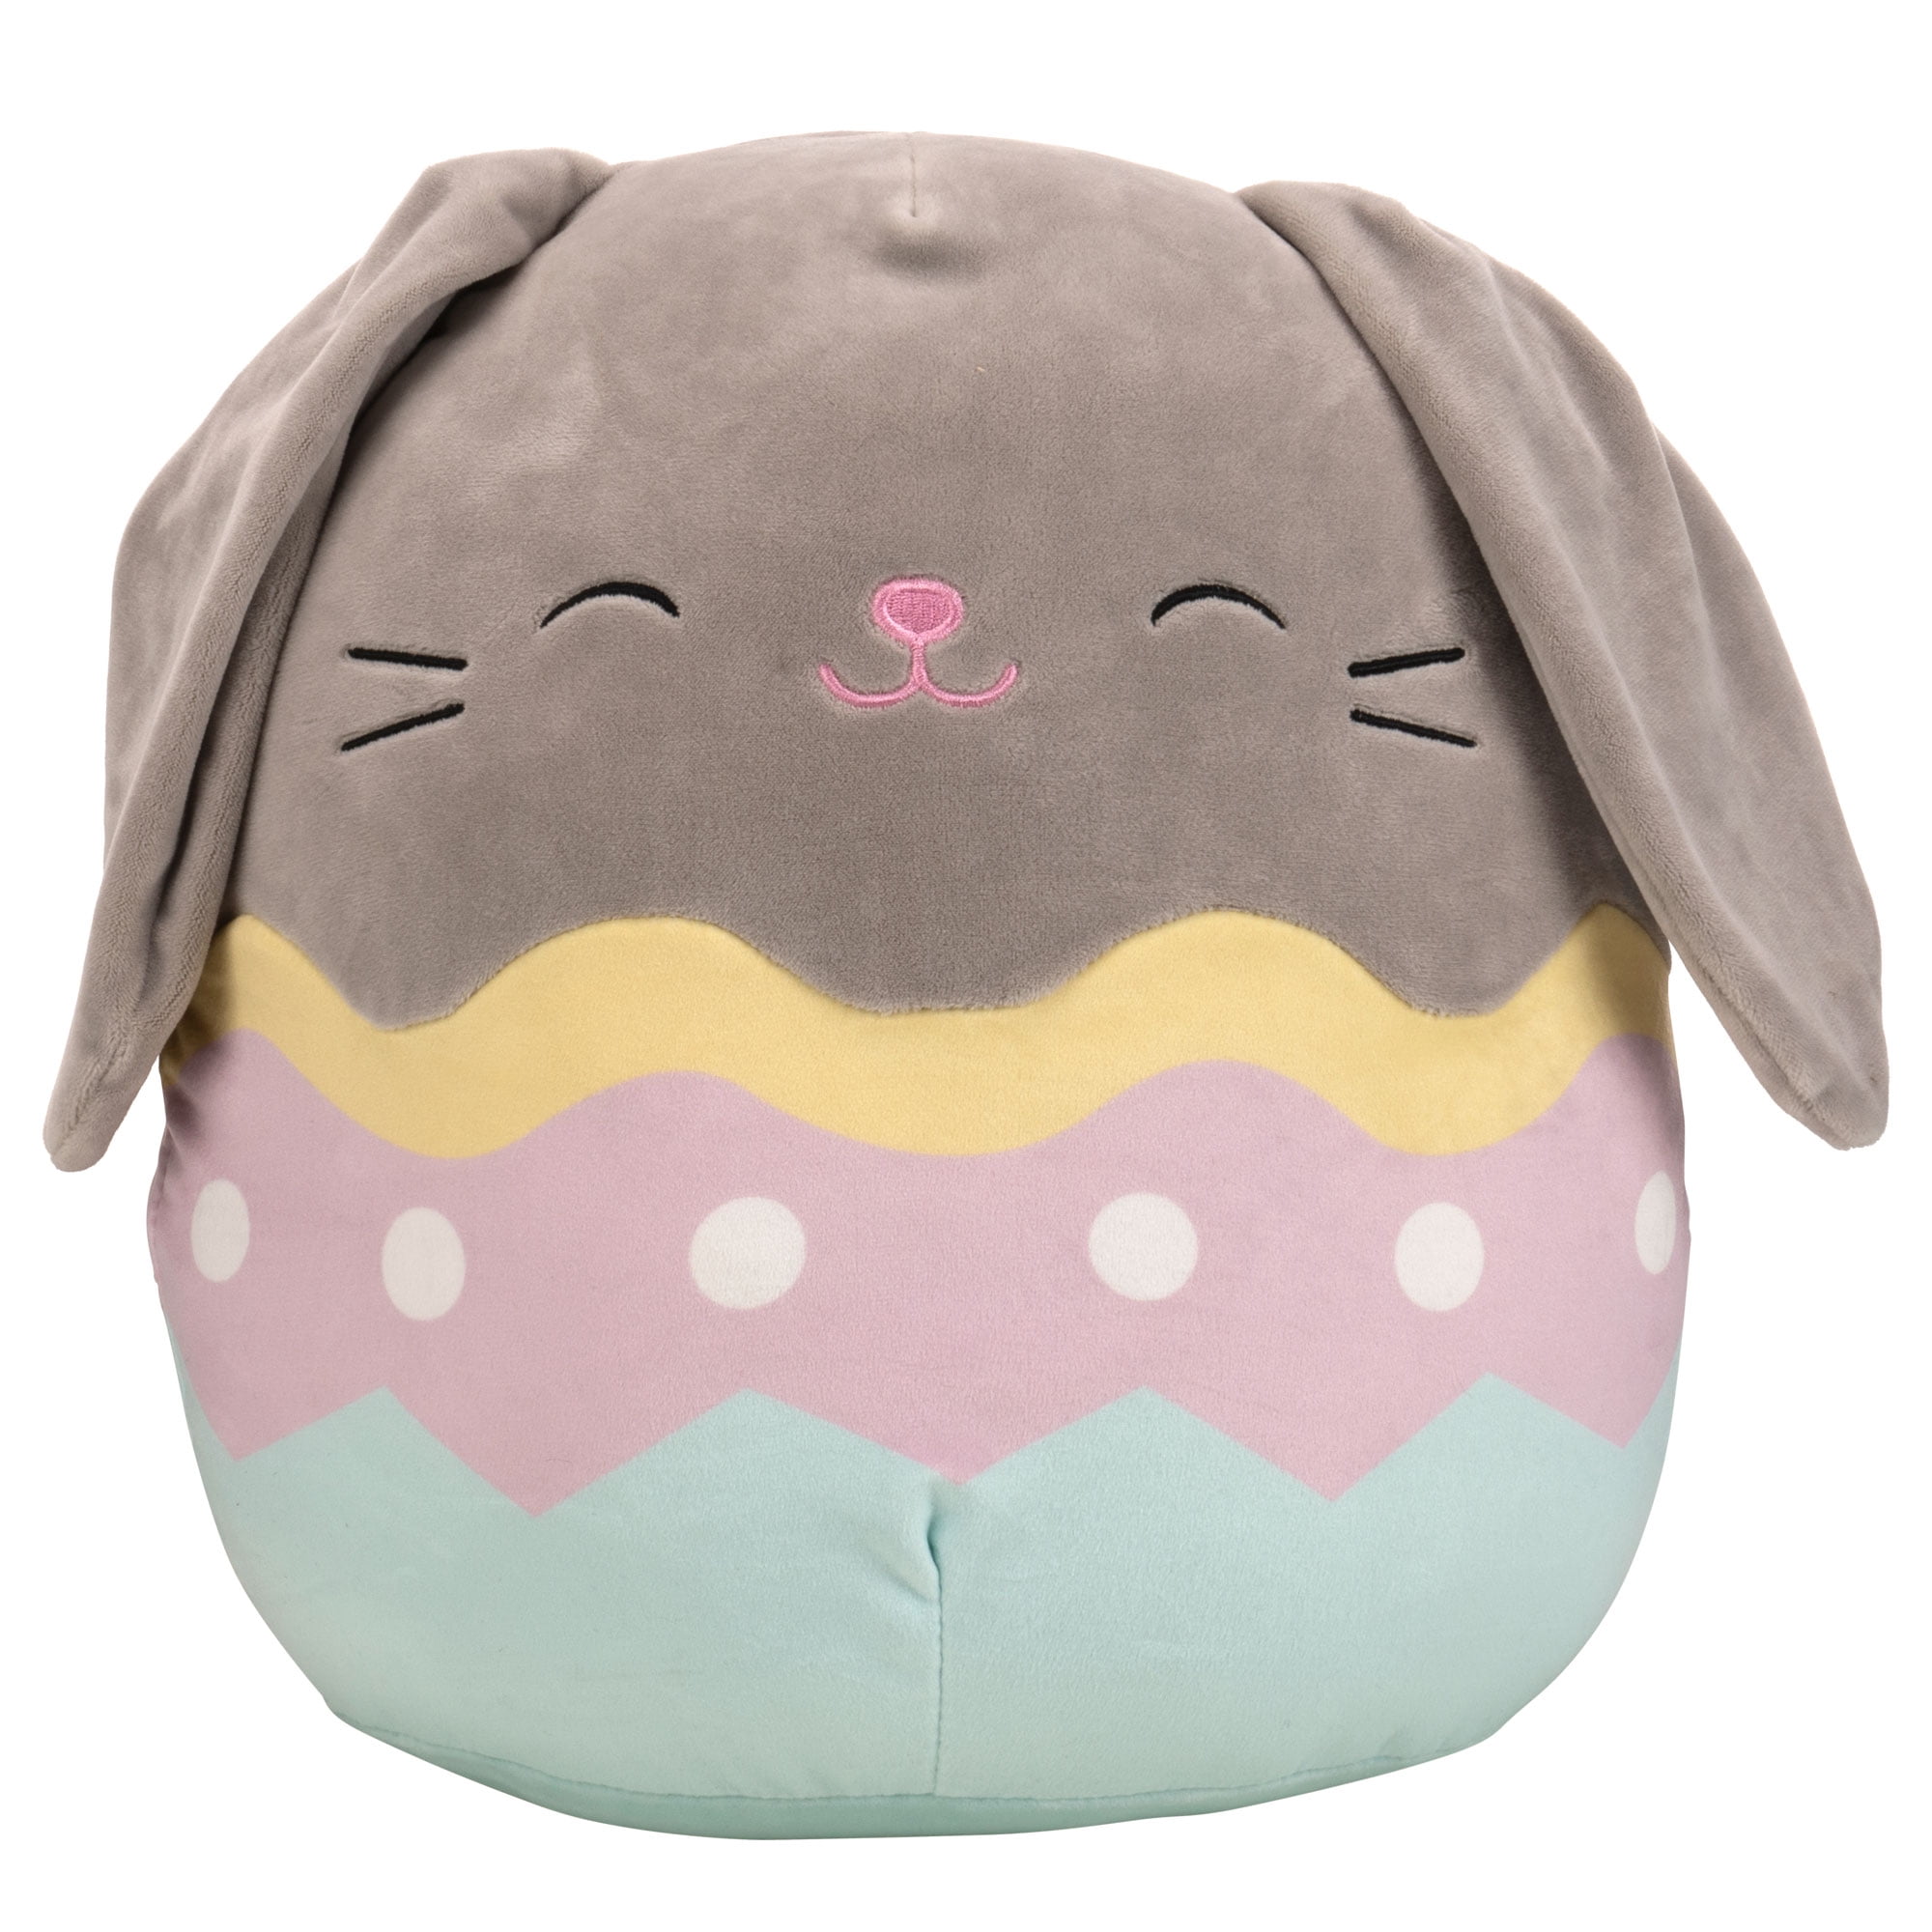 Squishmallow Kellytoy 8" Lilac The Bunny & Baby Plush Doll Toy Pillow Pet 